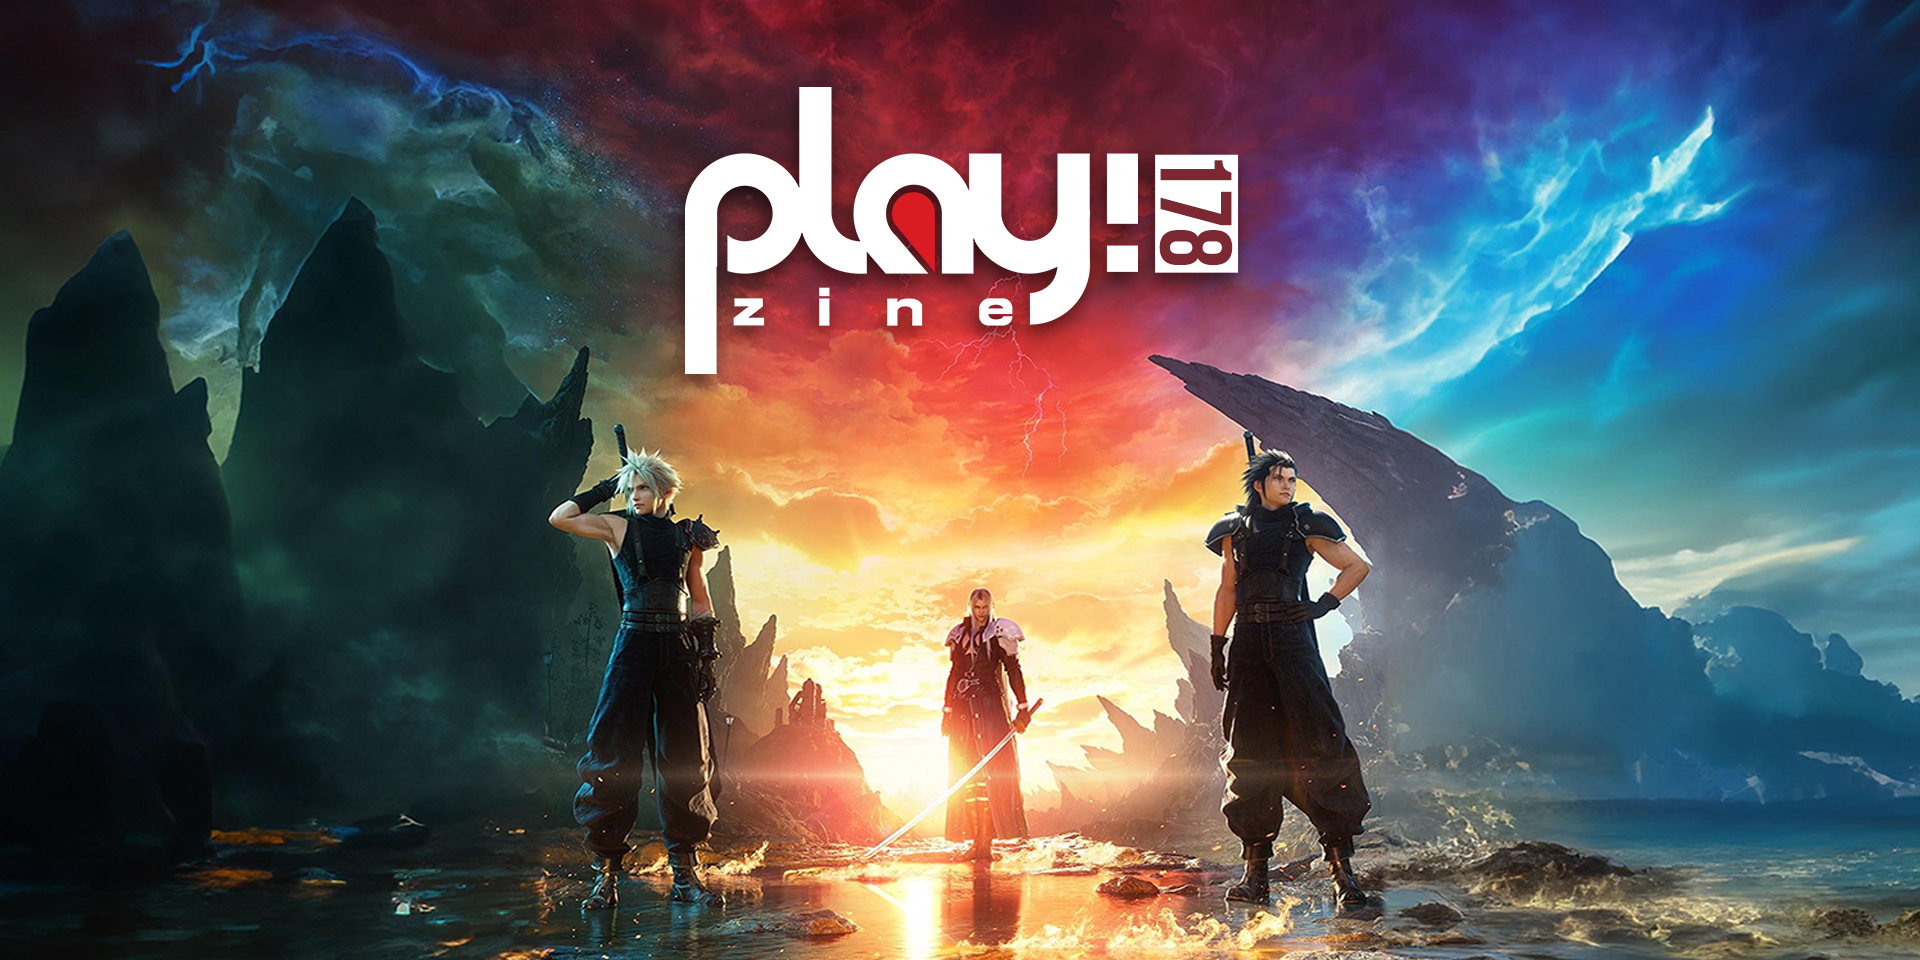 play-178-web-cover-24-1